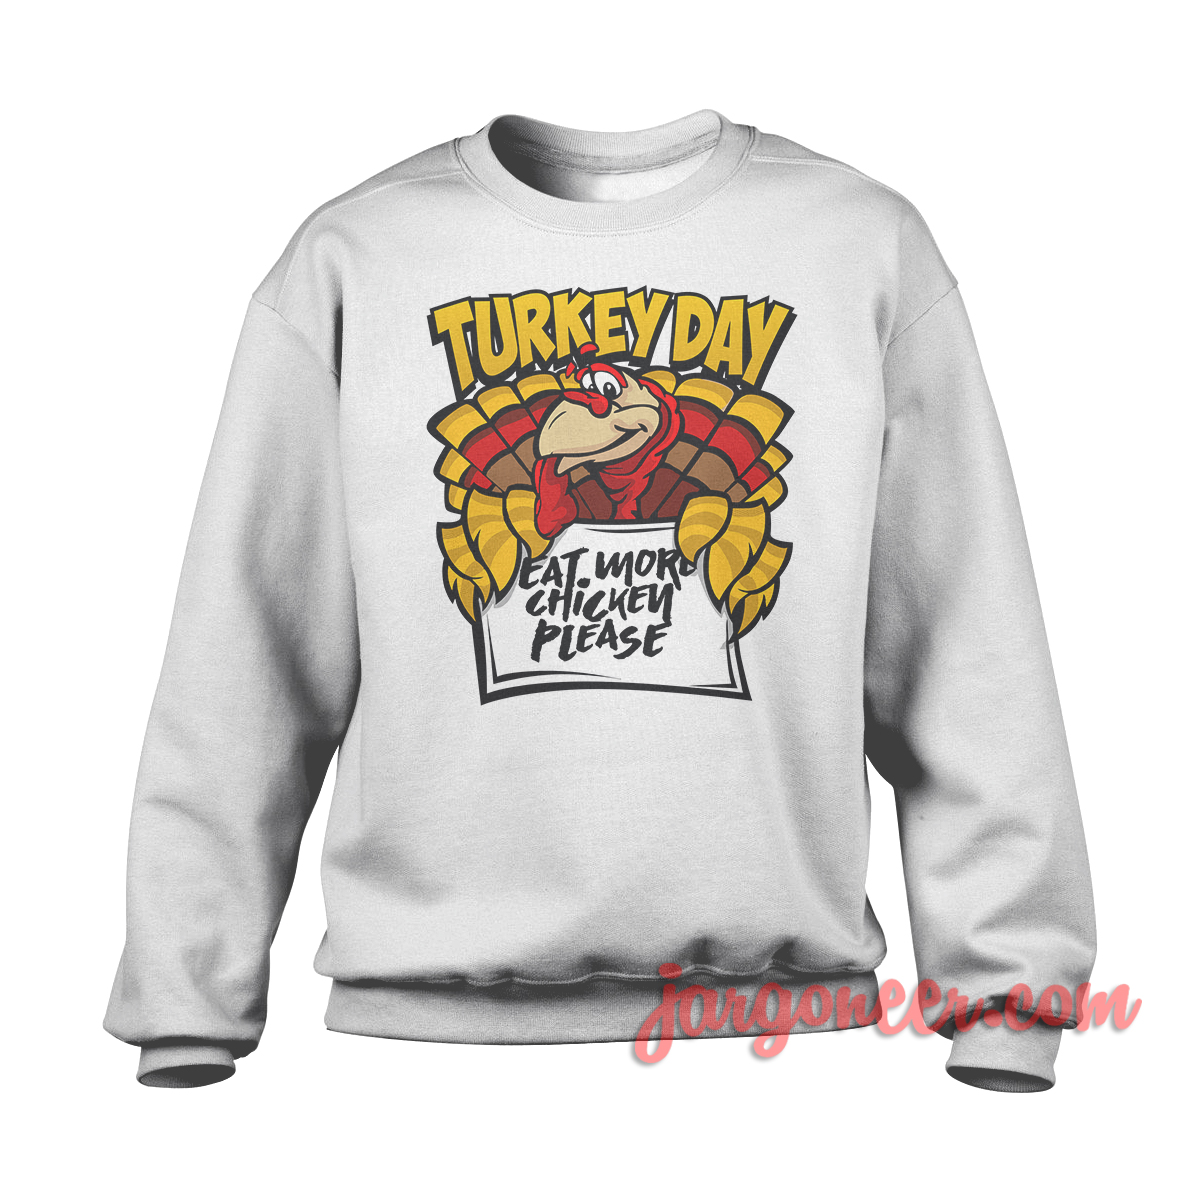 Happy Turkey Dat And Eat More Chicken White SS - Shop Unique Graphic Cool Shirt Designs